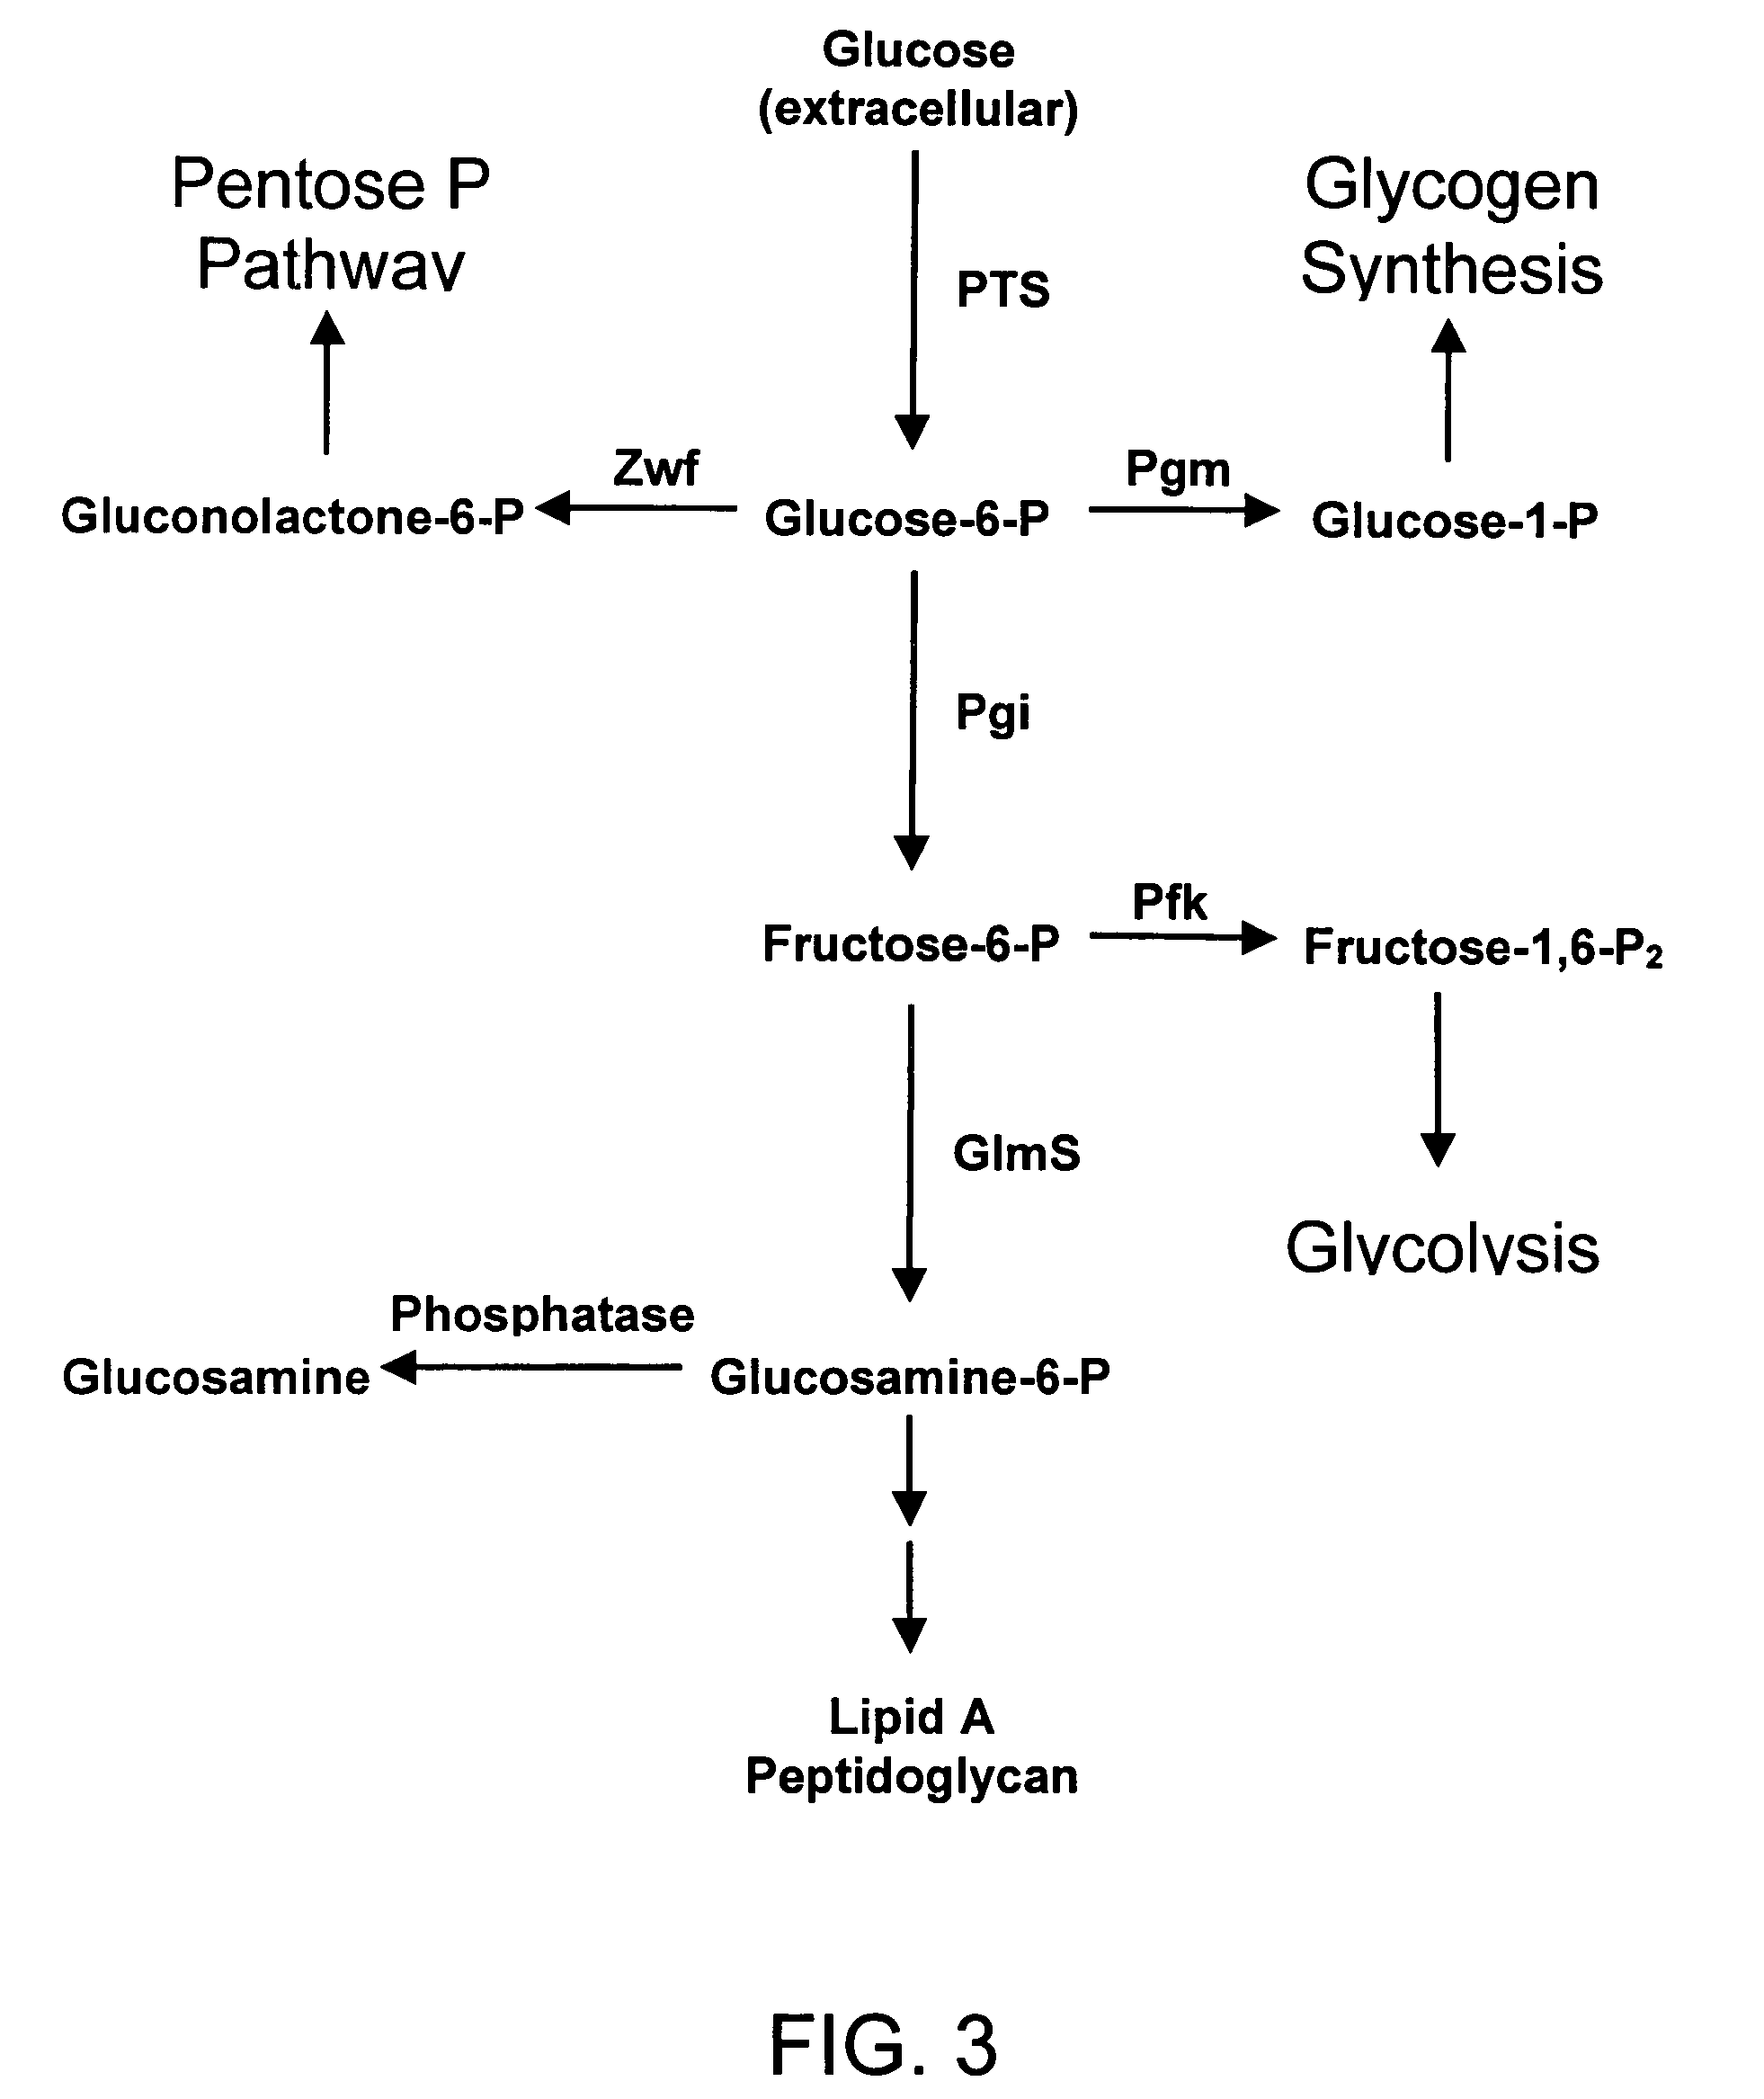 Process and materials for production of glucosamine and N-acetylglucosamine